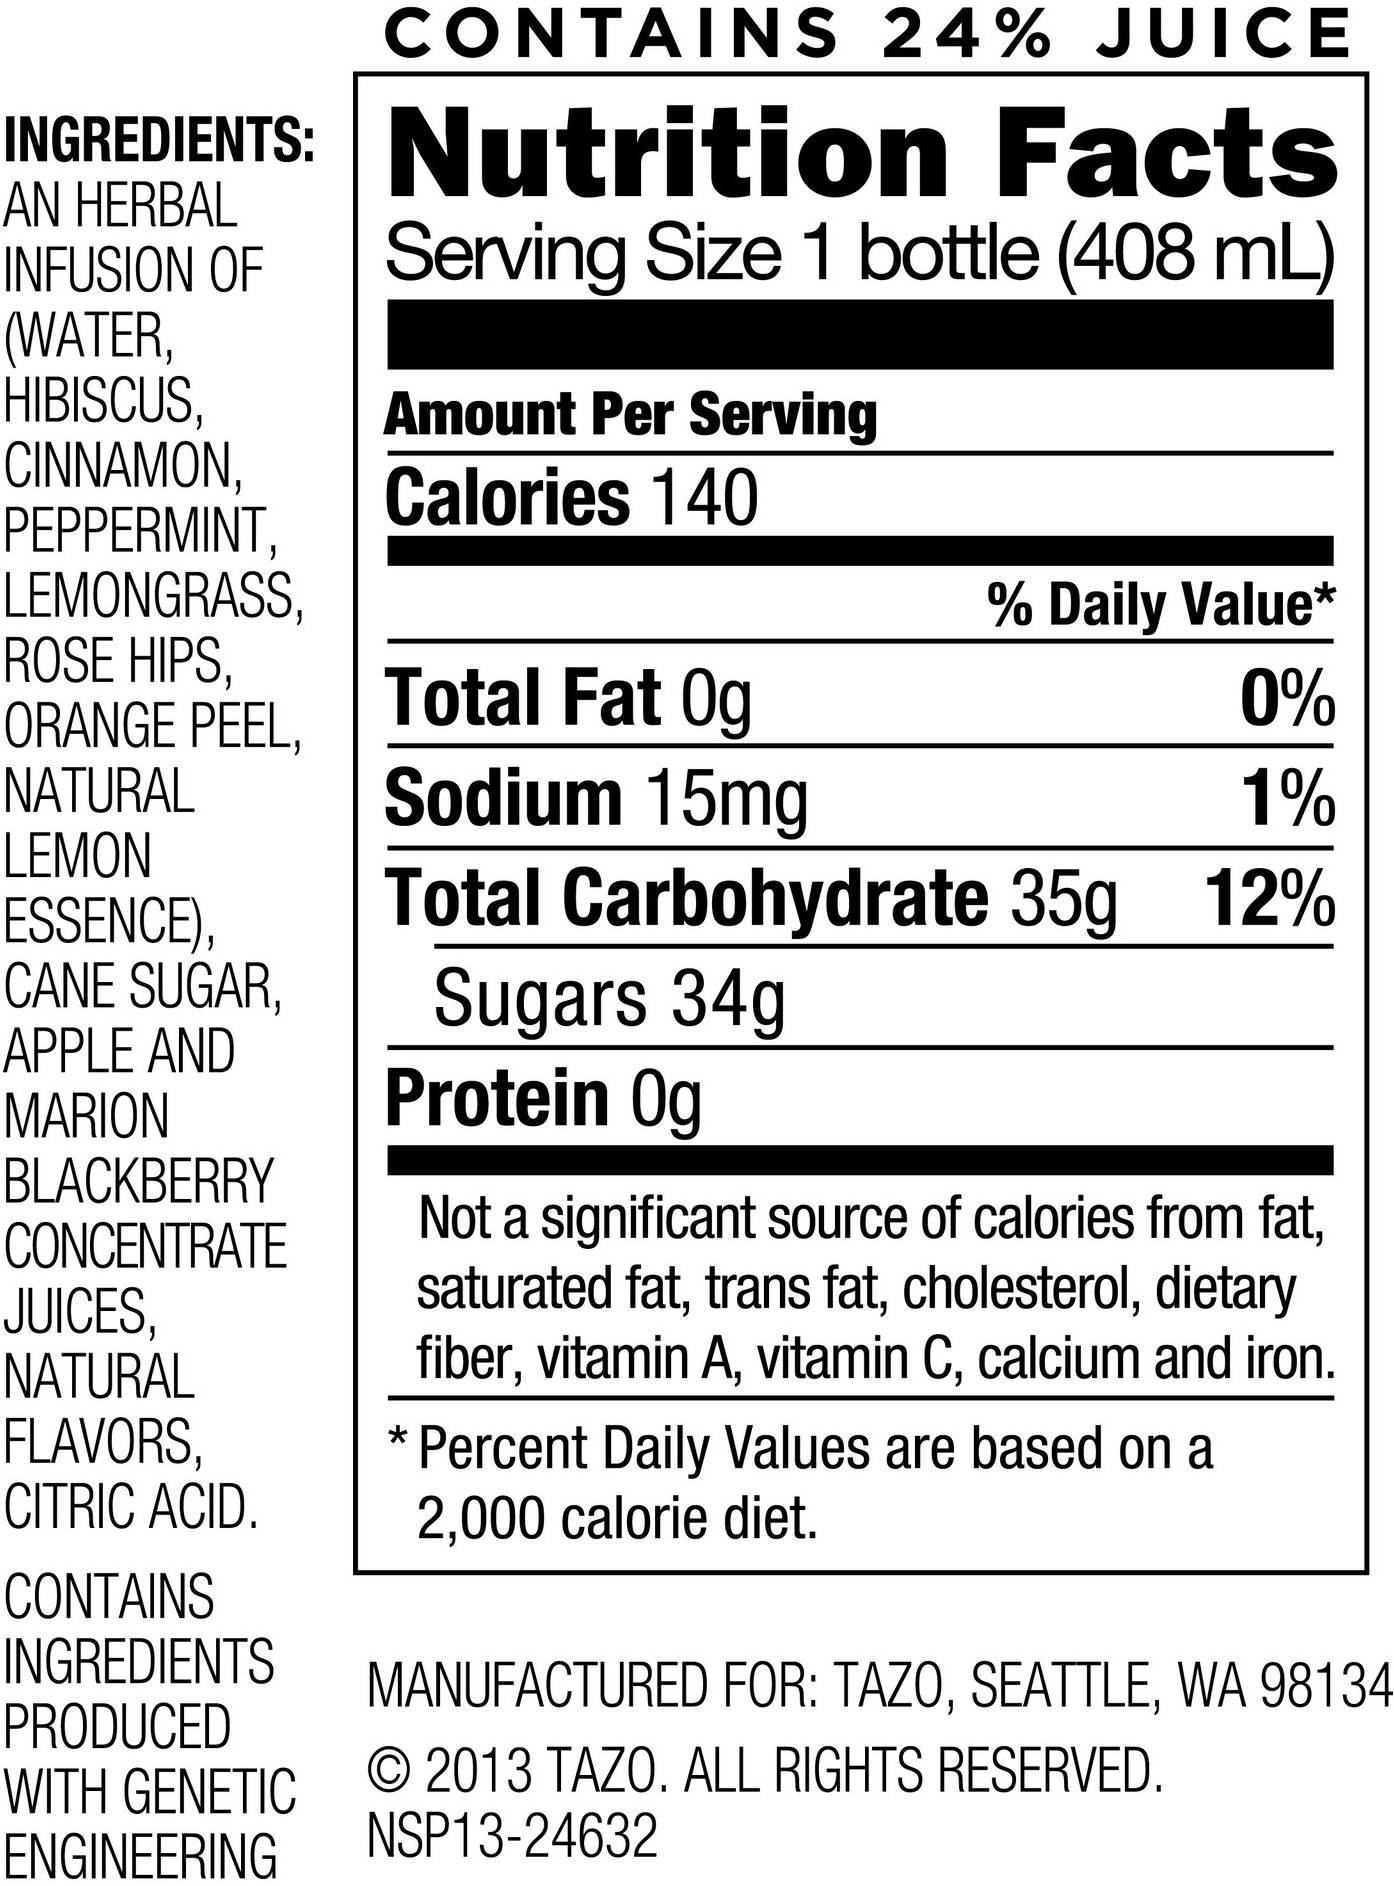 Image describing nutrition information for product Tazo Brambleberry